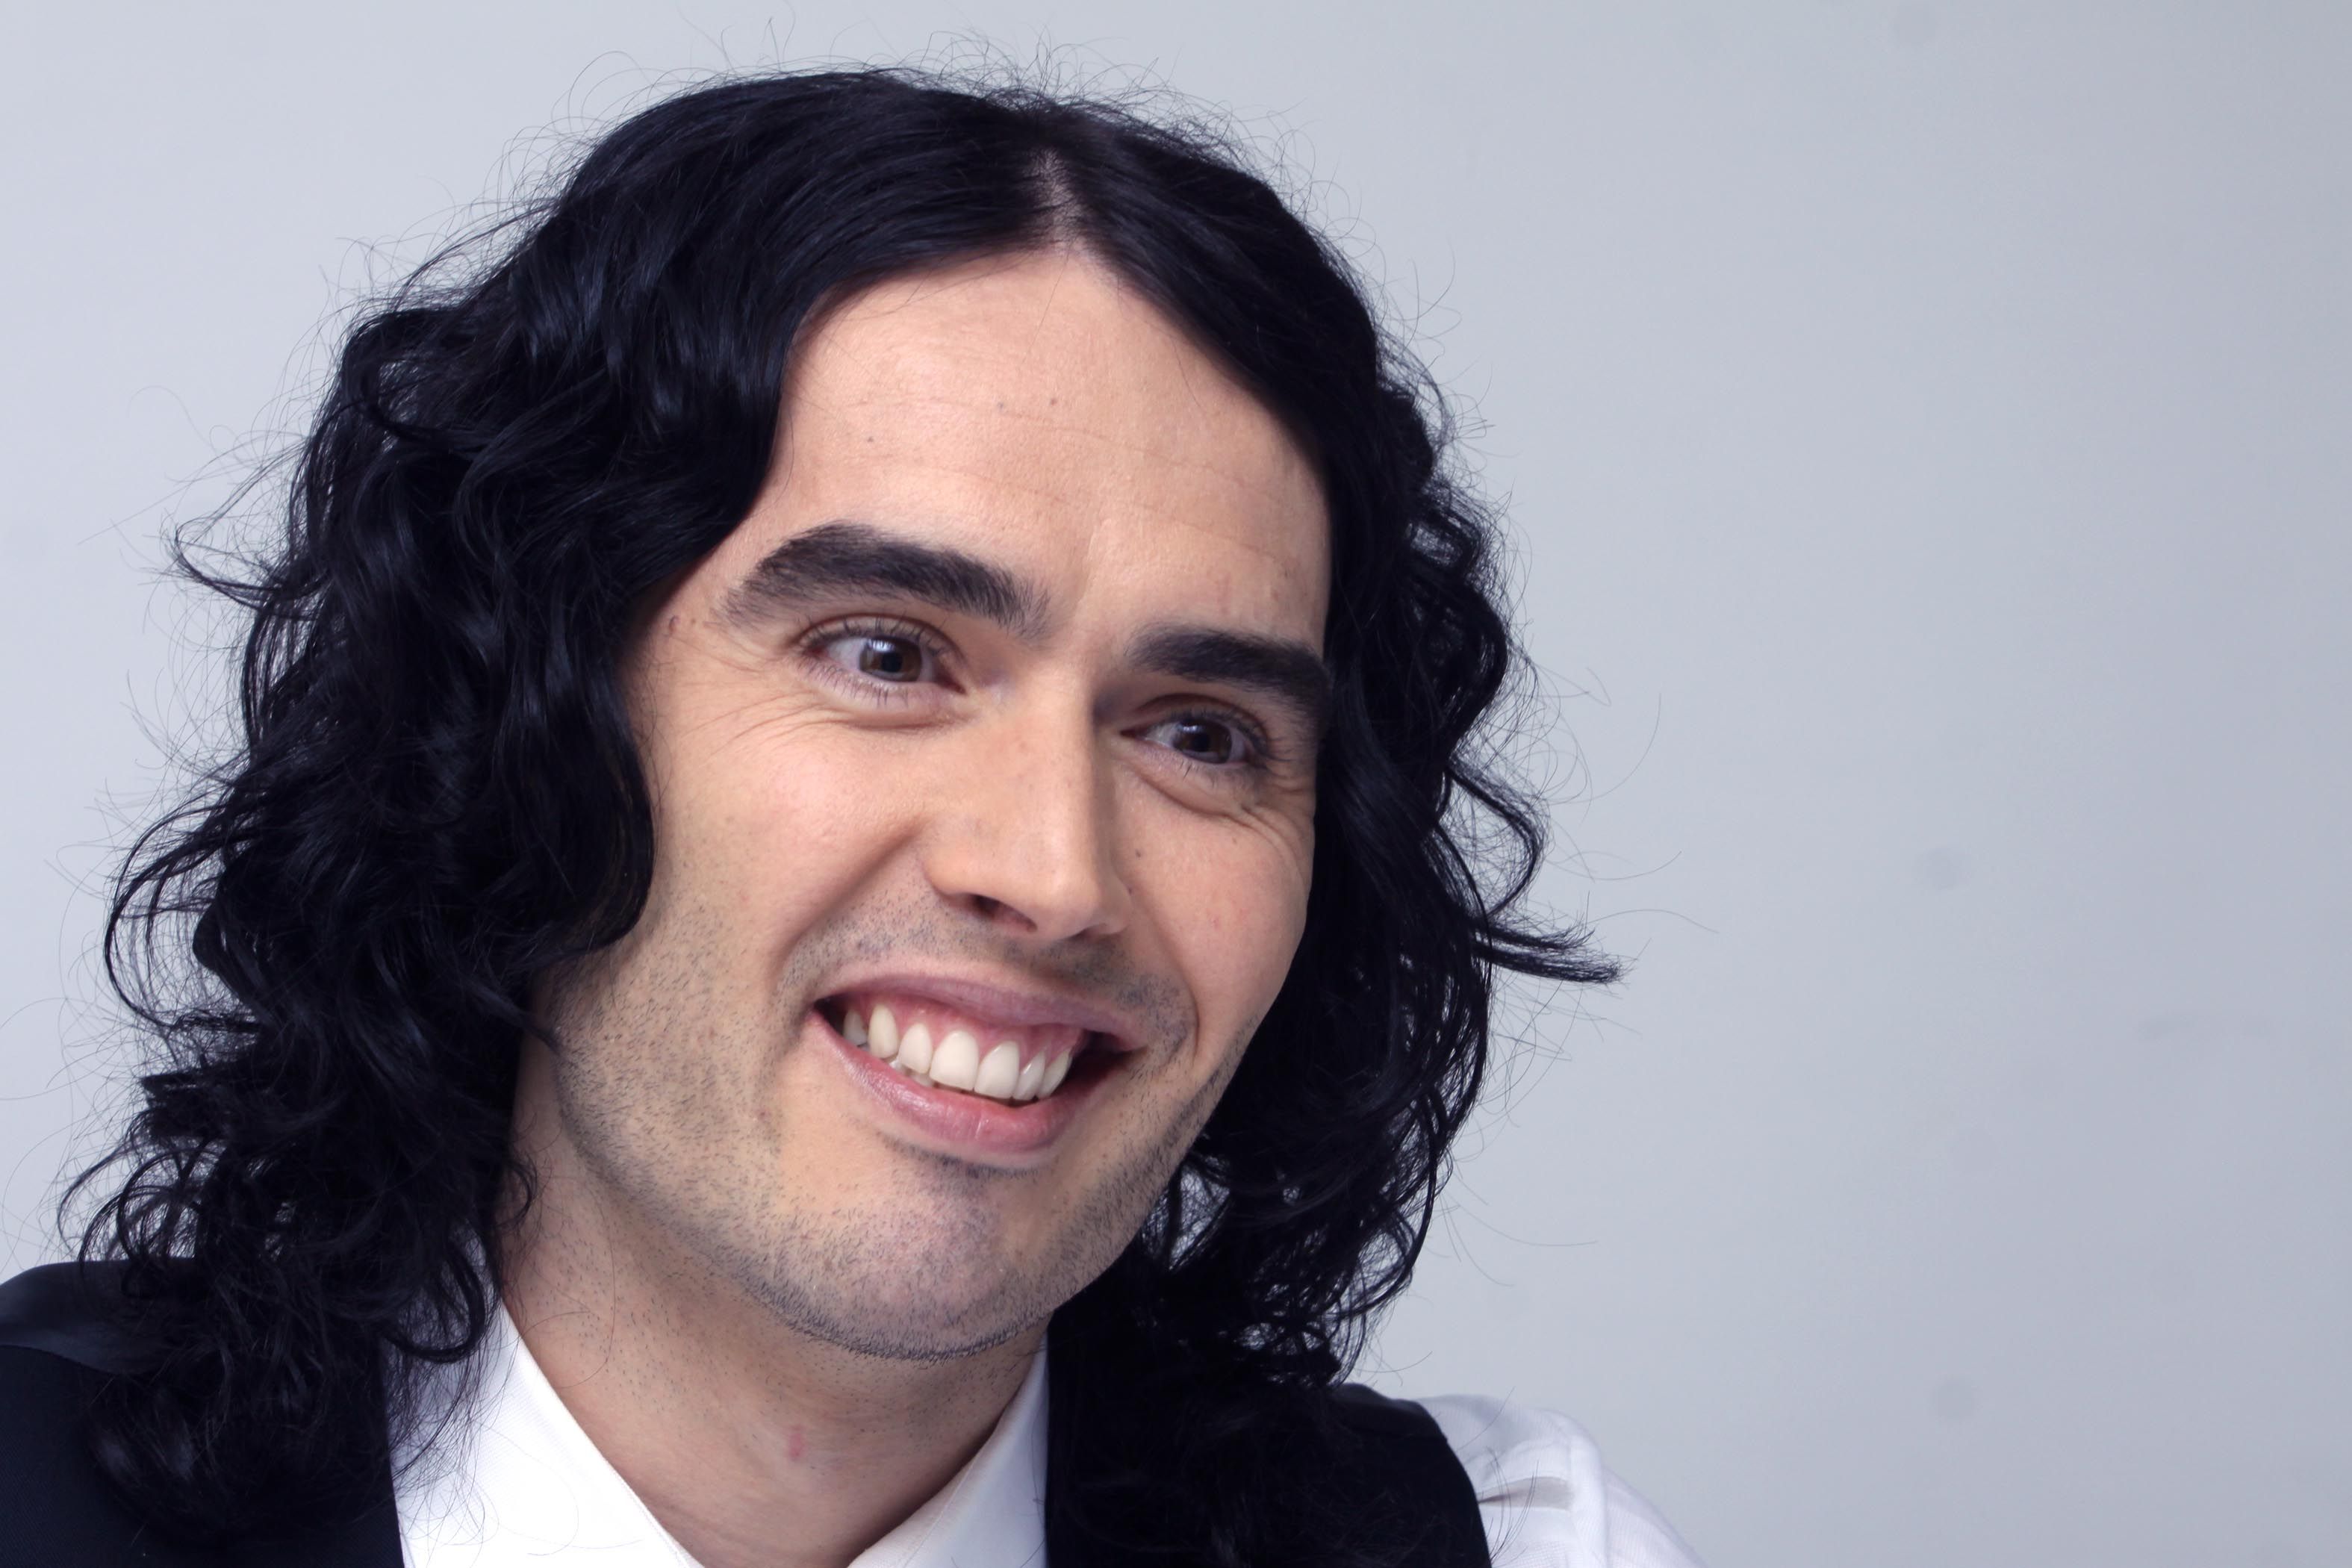 Celebrity Russell Brand